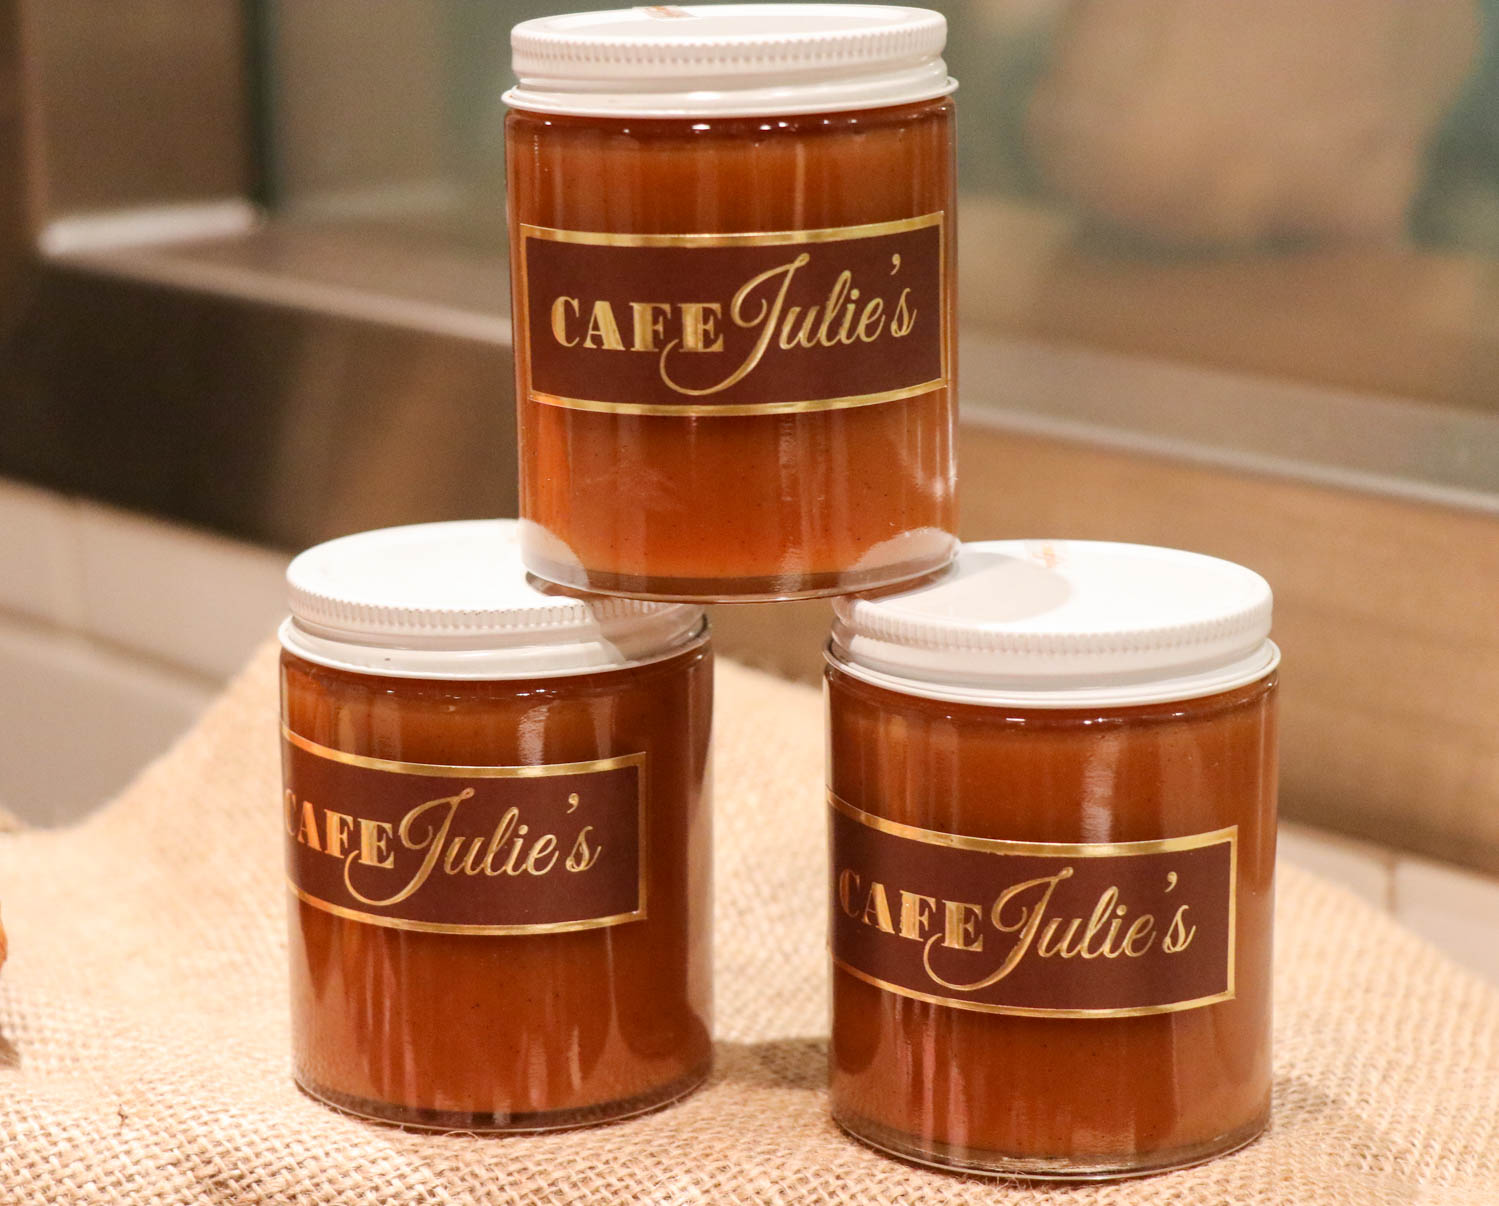 Three jars of caramel from Cafe Julie's